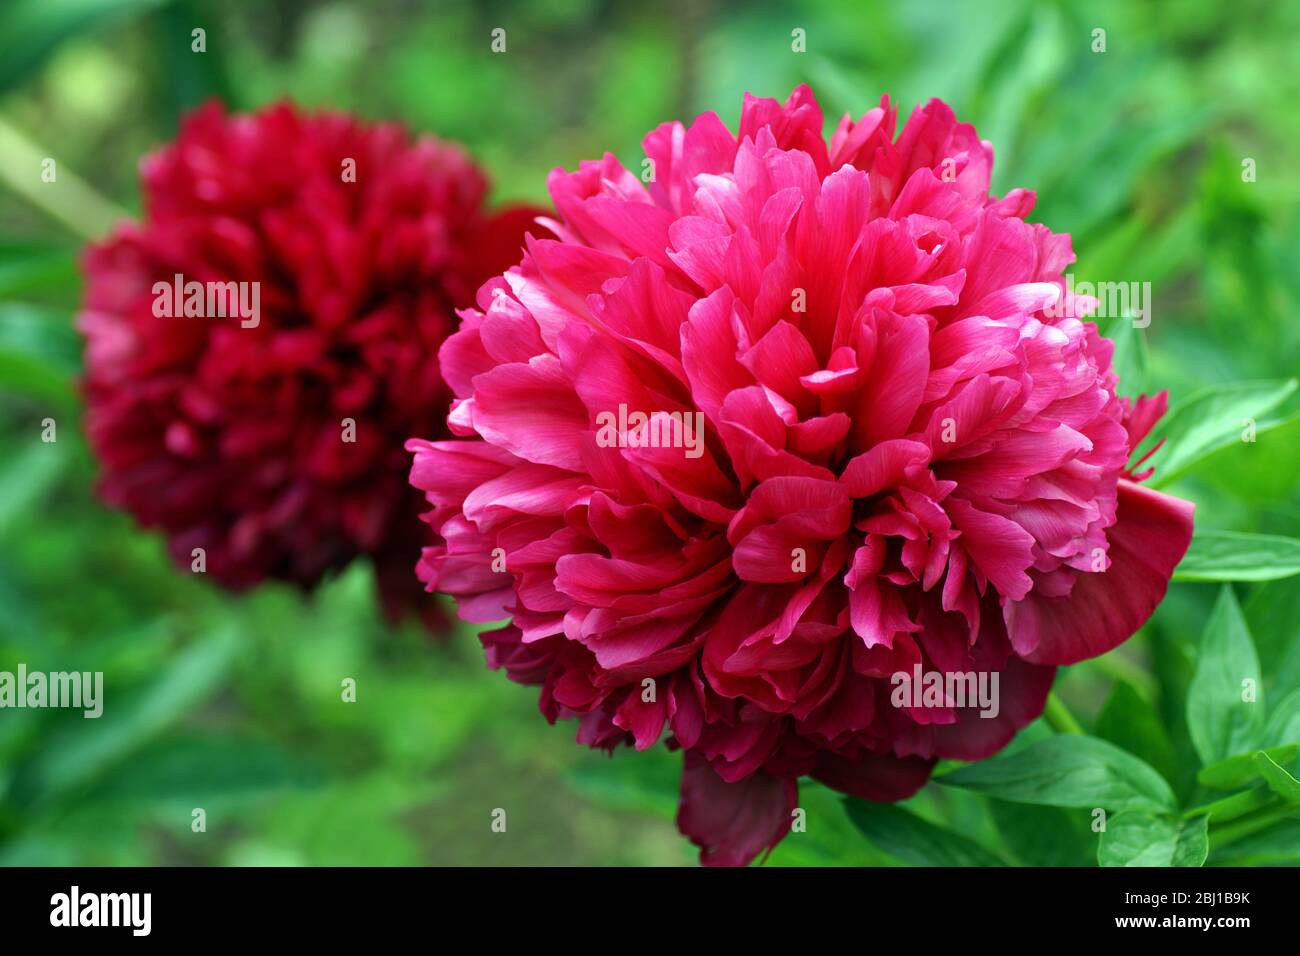 Paeonia Red Grace. Double red peony flower. Paeonia lactiflora (Chinese peony or common garden peony). Stock Photo